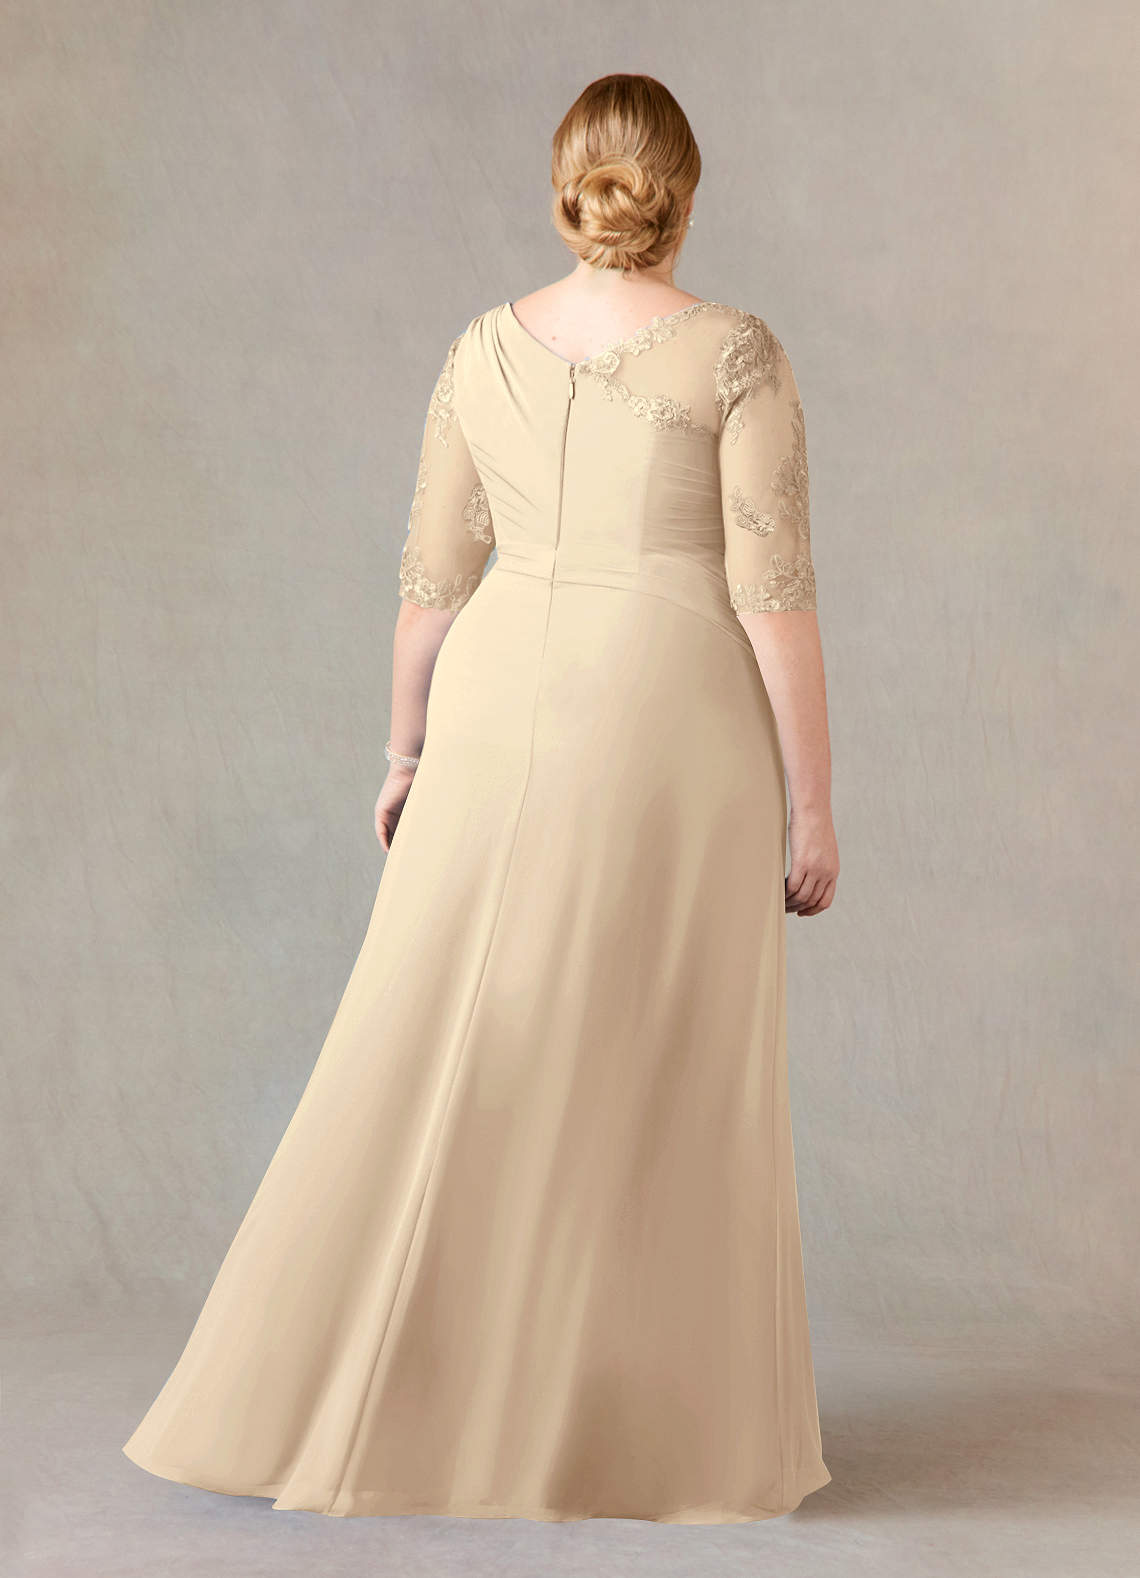 Azazie Dionysus Mother of the Bride Dresses A-Line Boatneck Lace Chiffon Floor-Length Dress image1